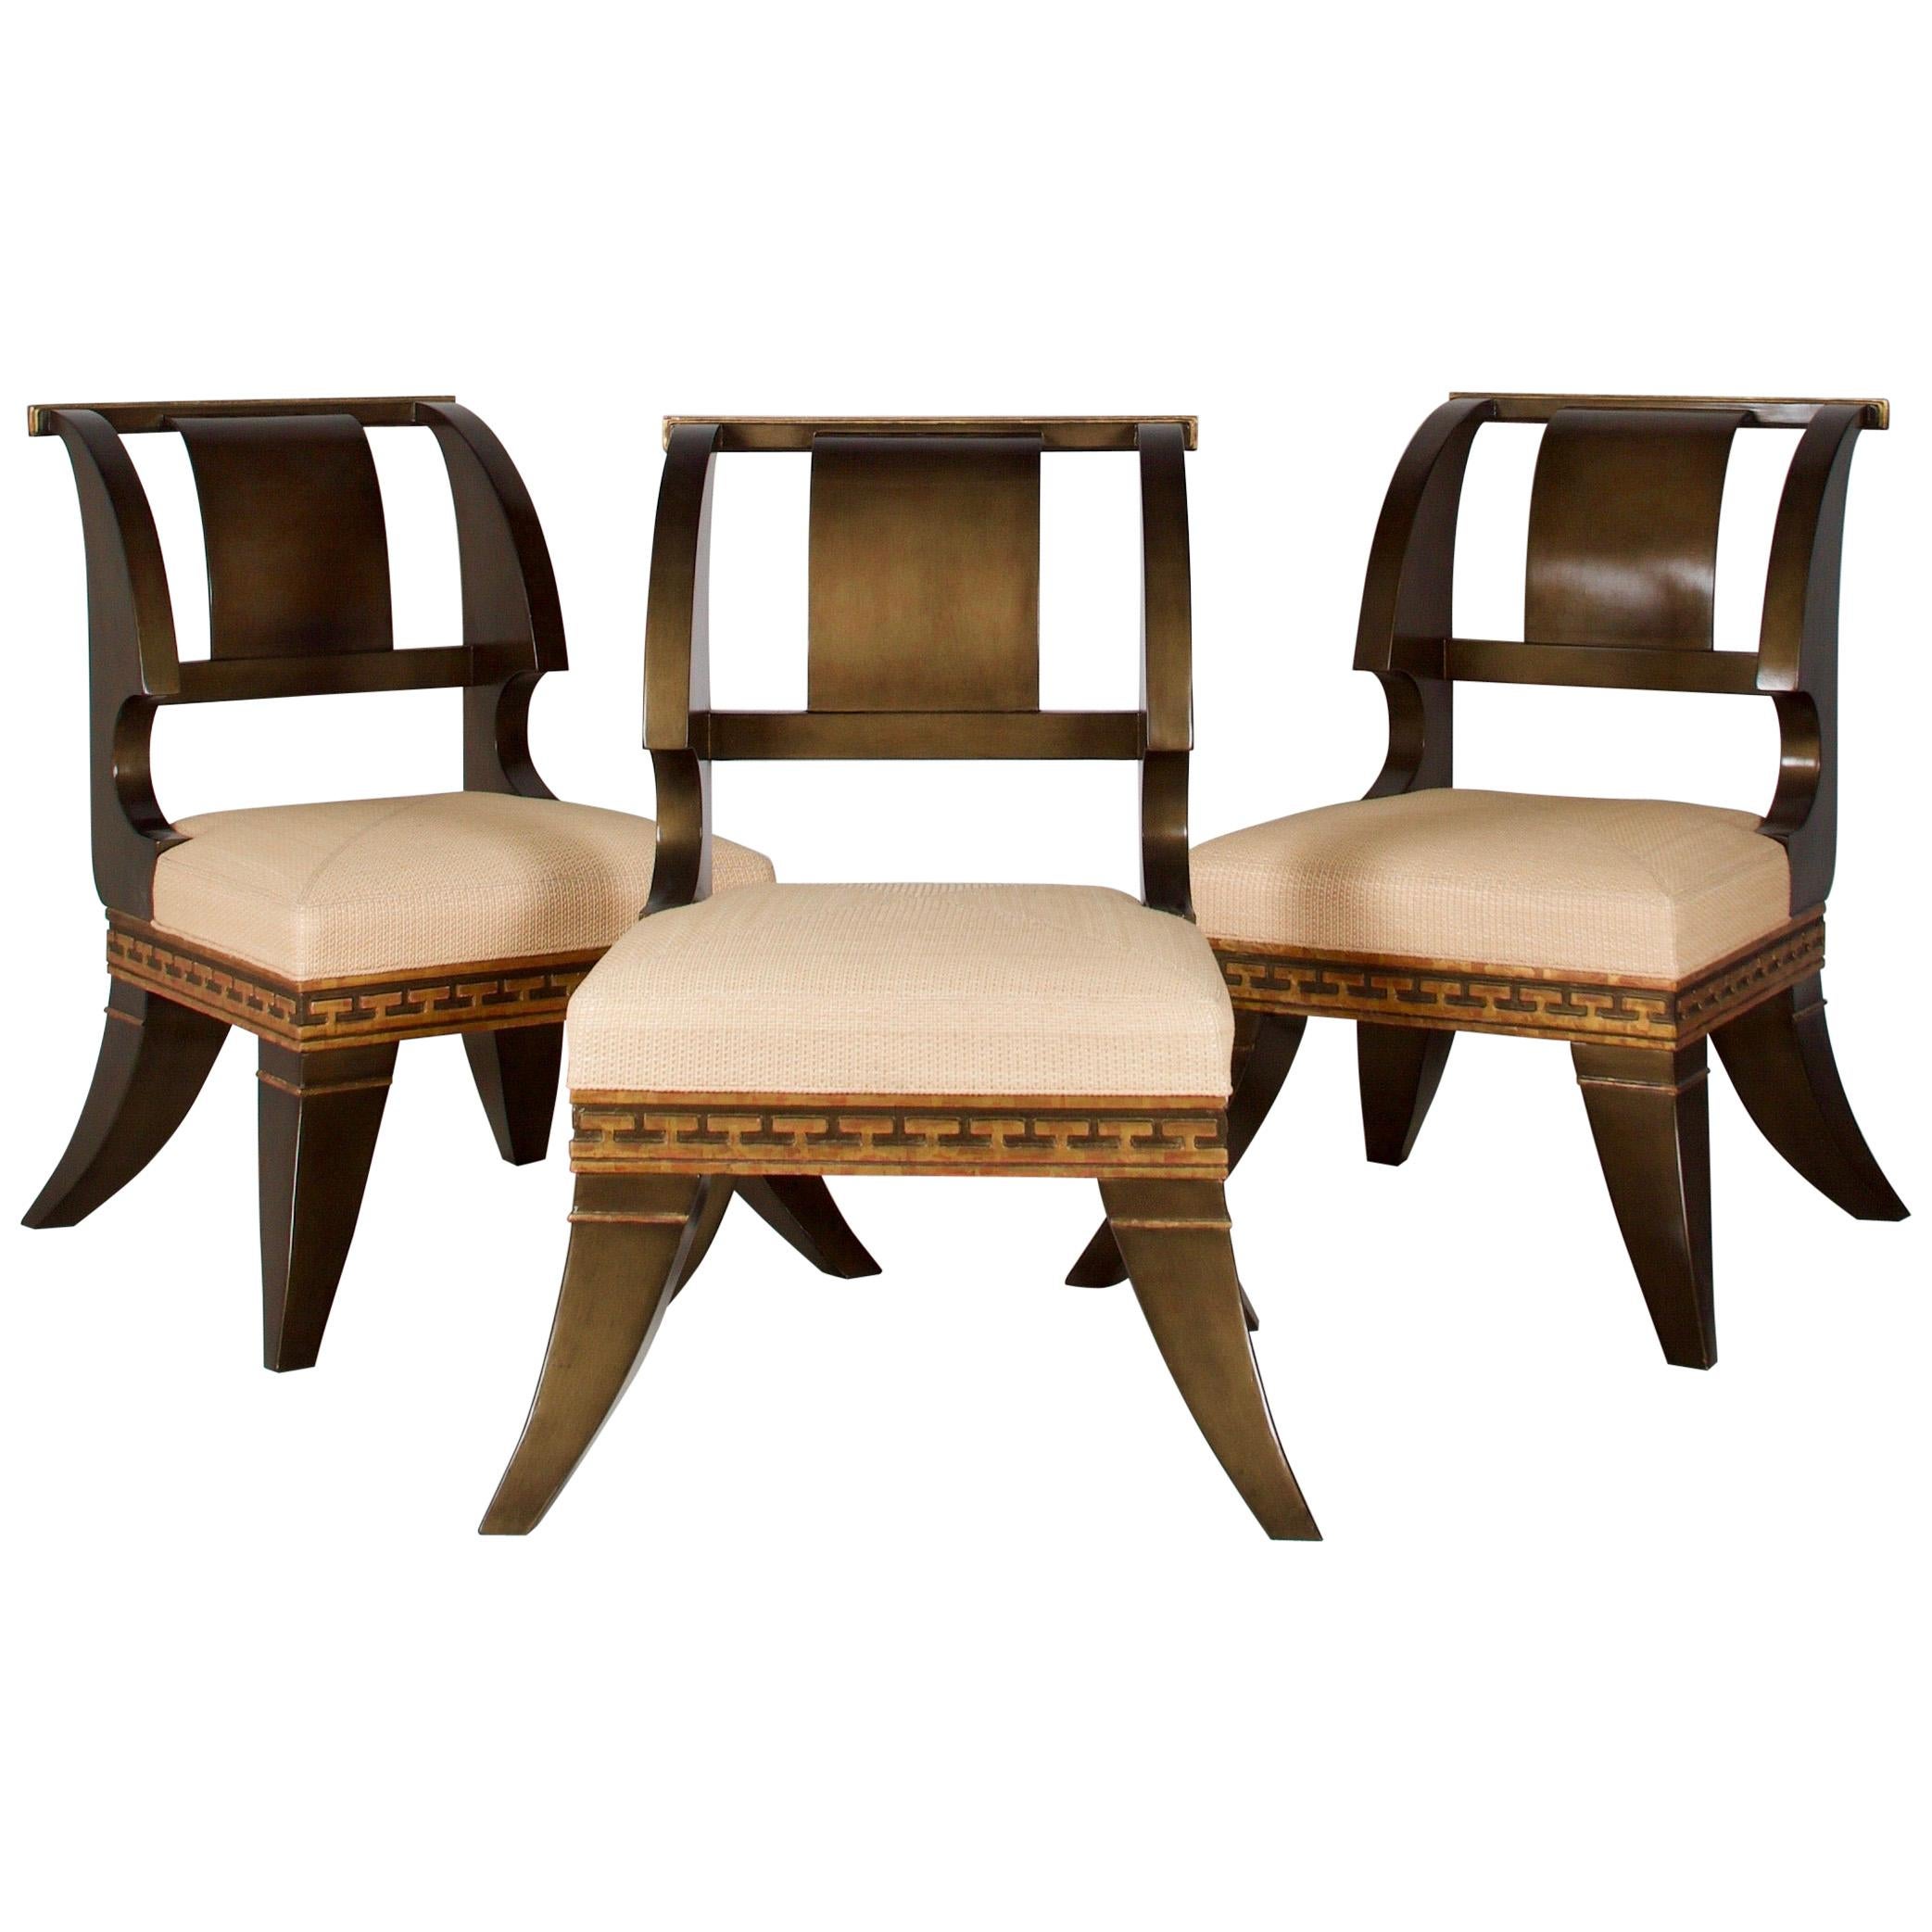 Modern Sabre Leg Chairs in  Engl. Neoclassic style, after a Model by Thomas Hope For Sale